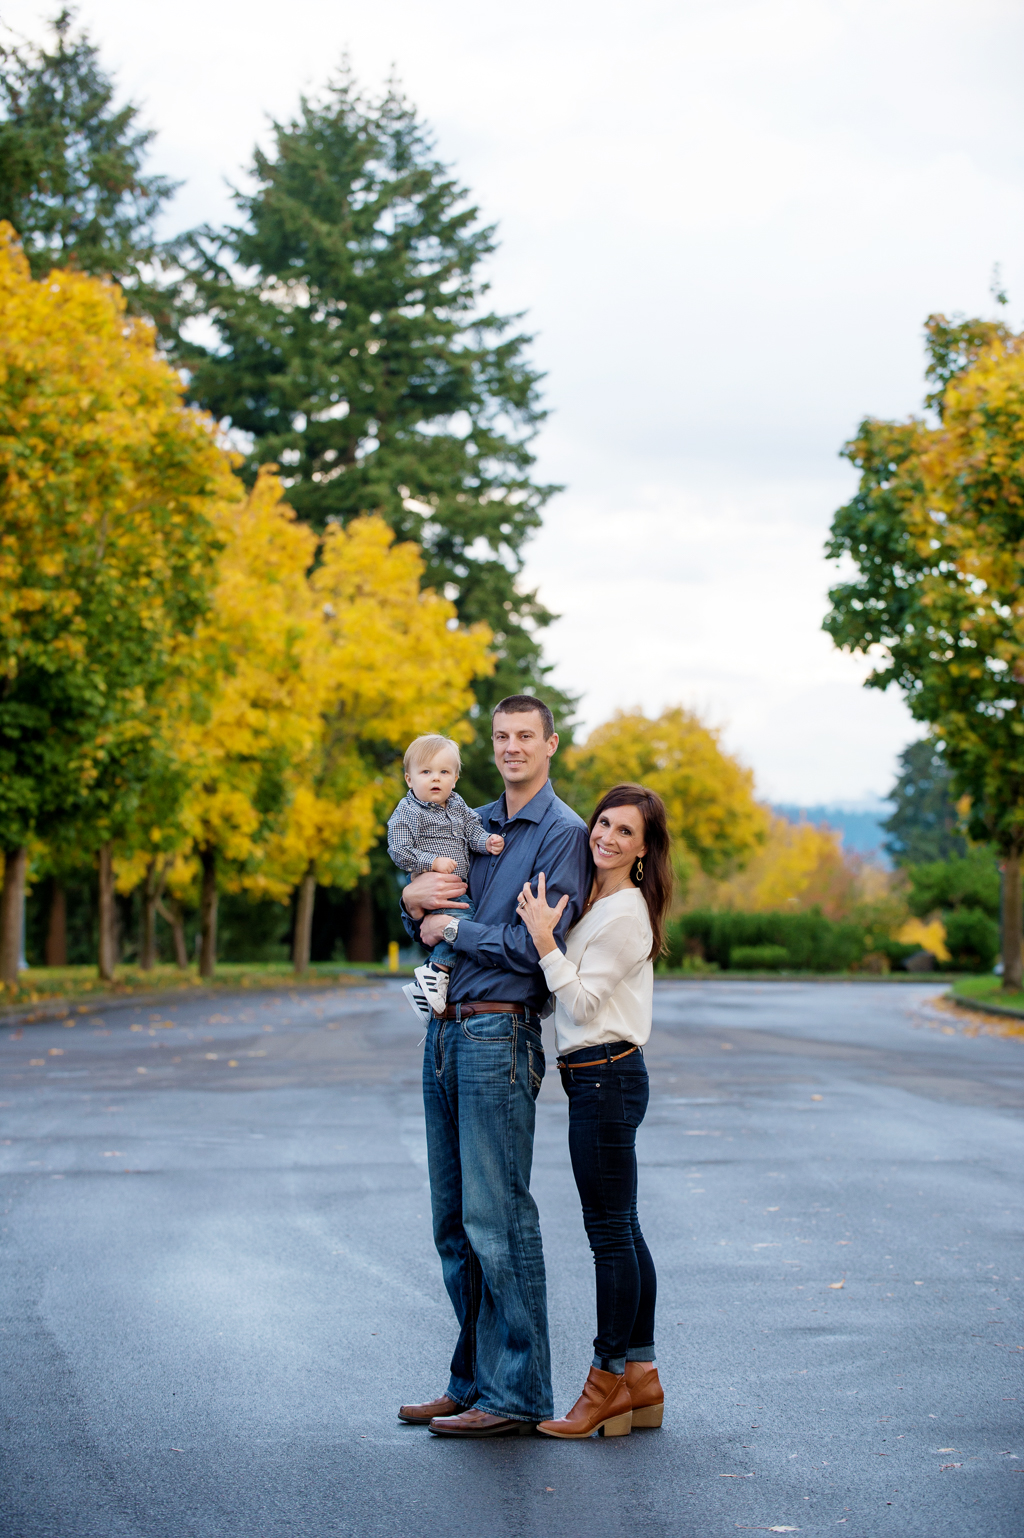 a mom and dad holding a baby boy stand in the middle of a street lined with yellow autumn trees